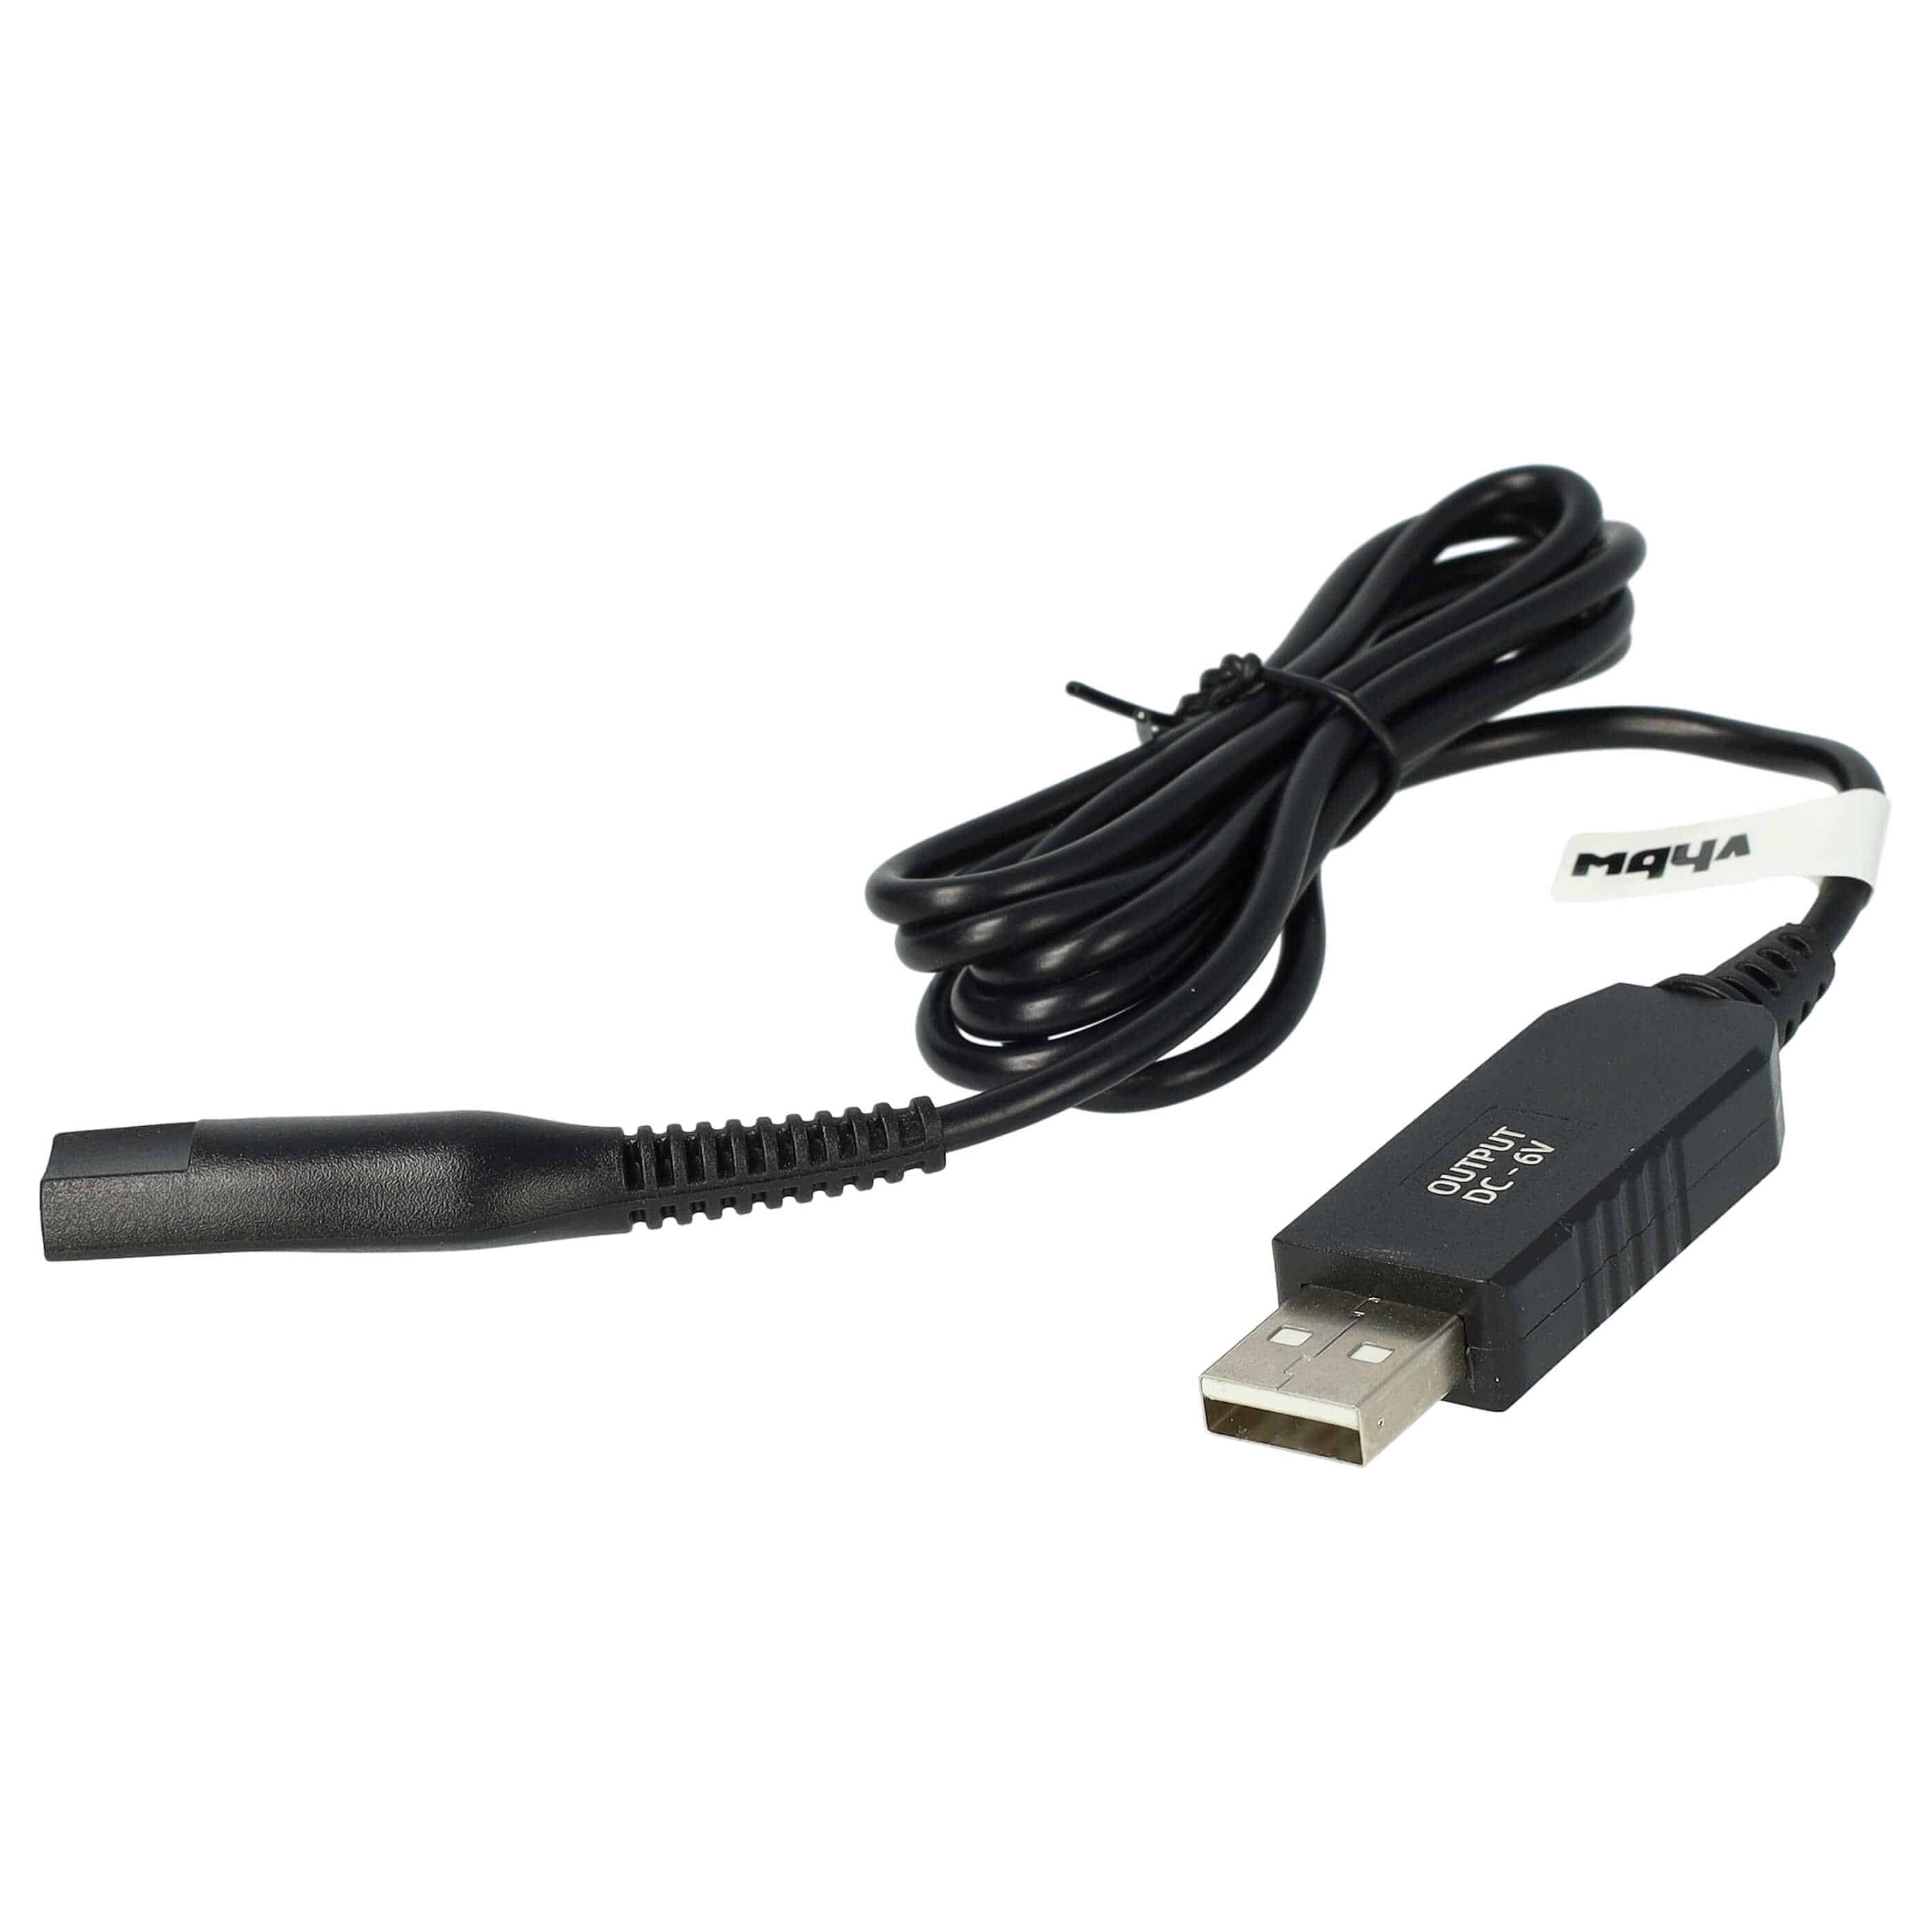 USB Charging Cable replaces Braun 491-5691, 81615618, 8161561, 81747675 for Braun Shaver - 120 cm